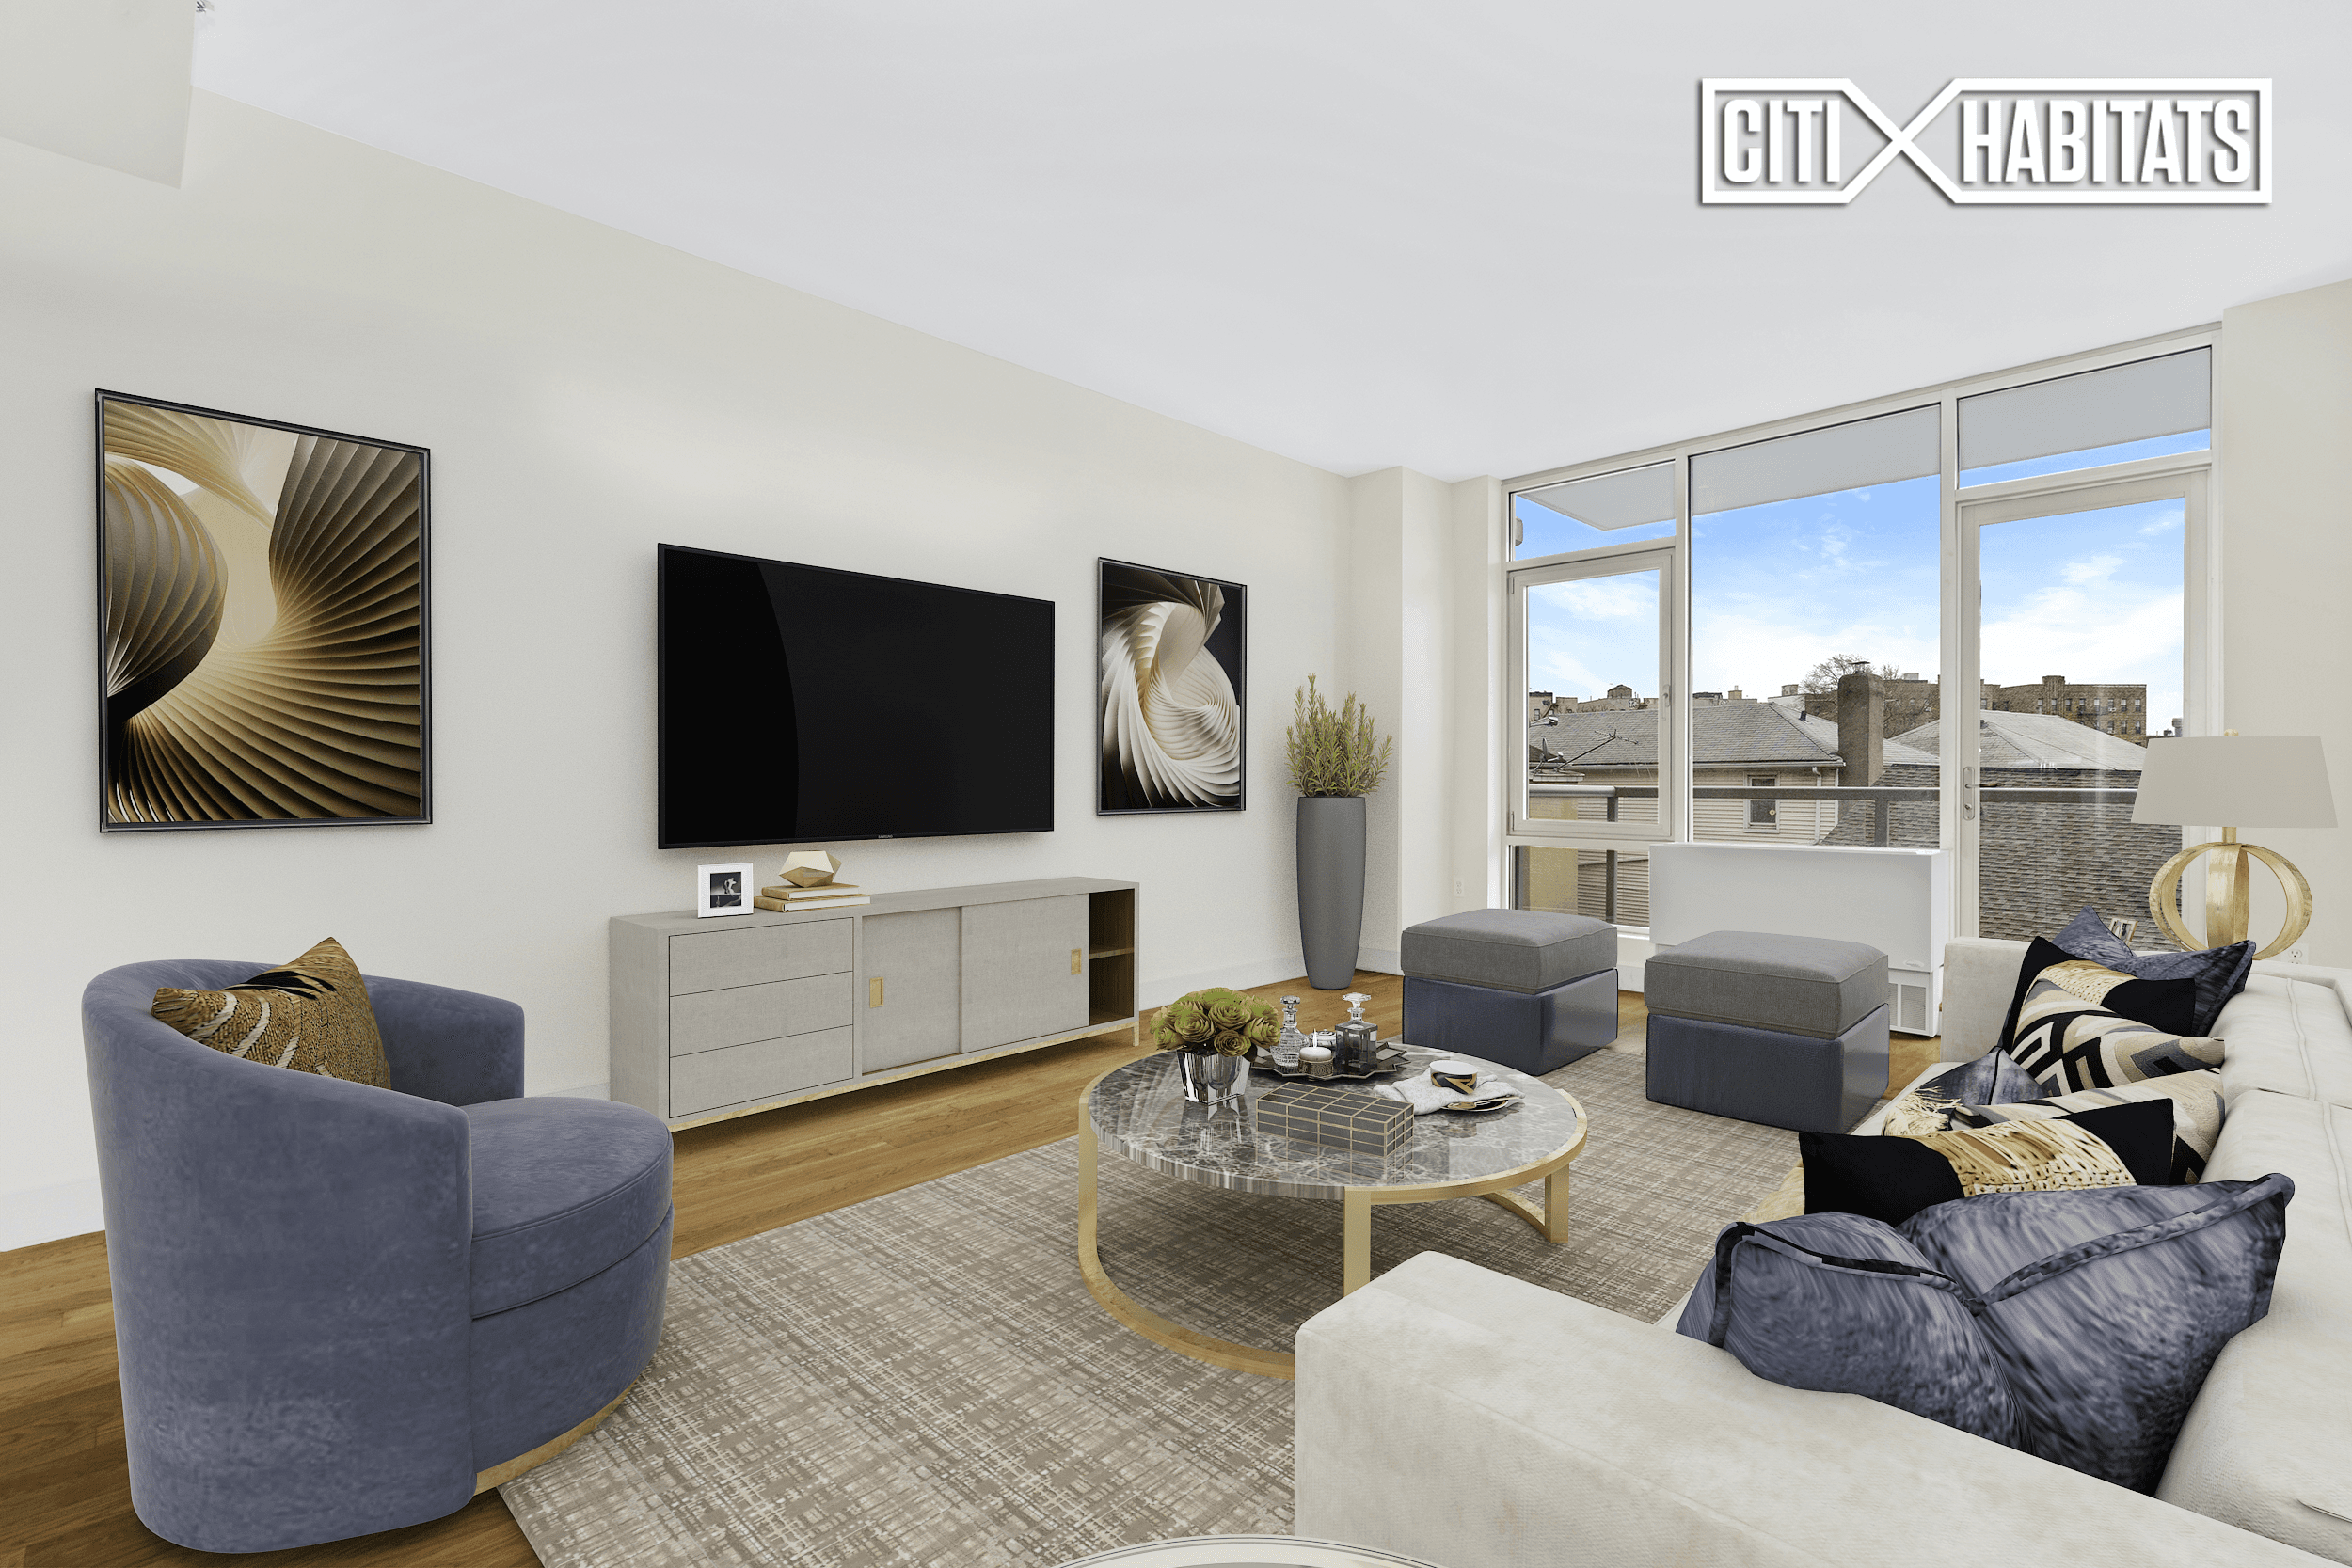 Make this brand new luxury apartment your home.